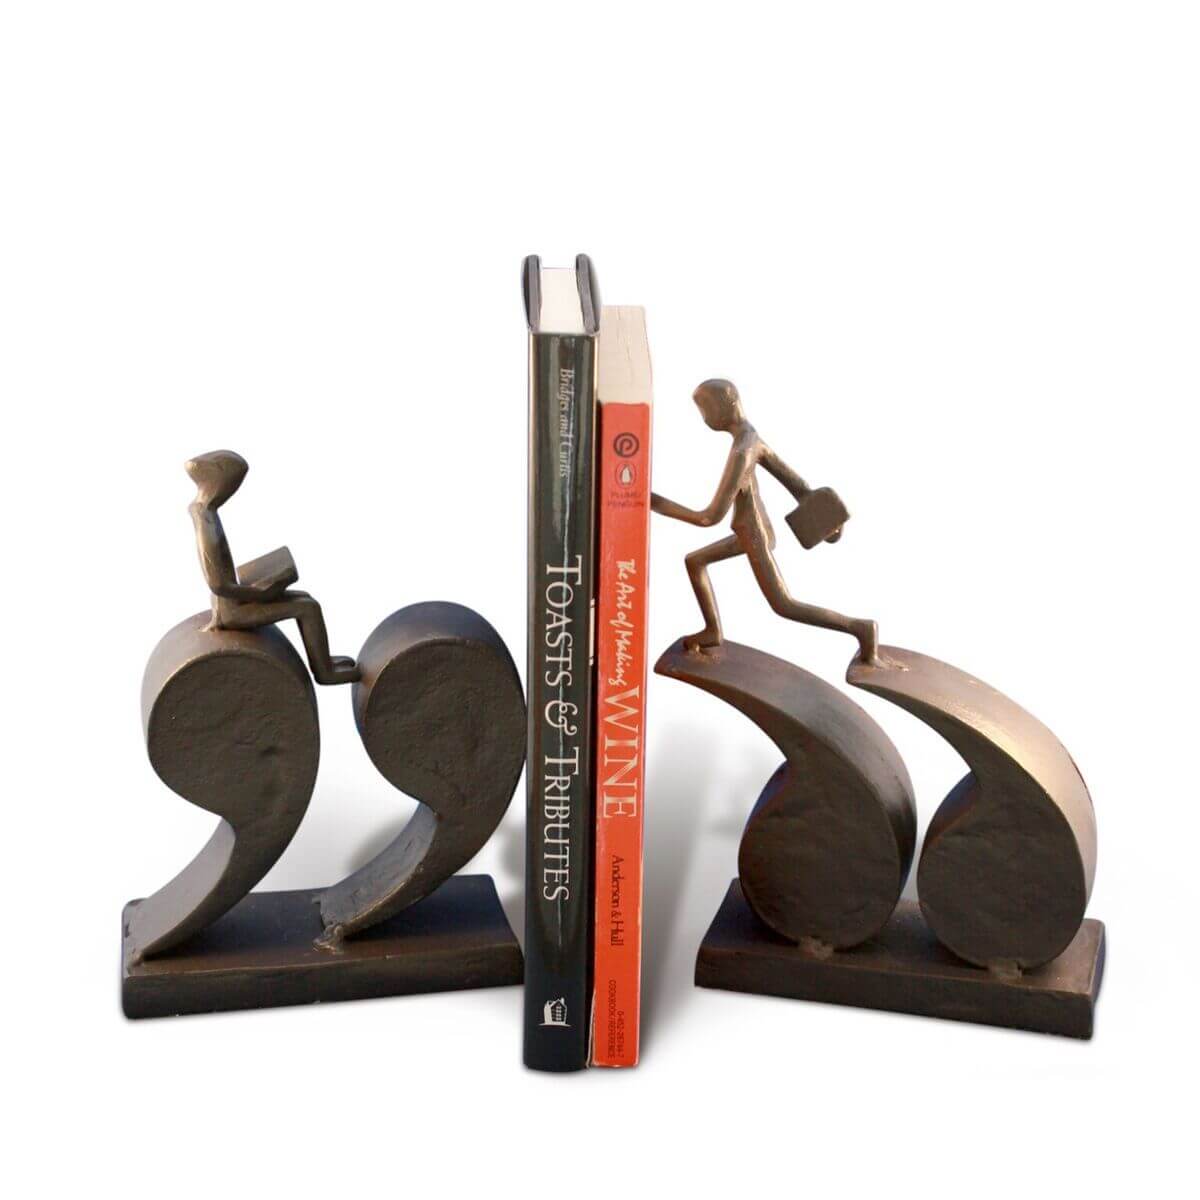 Cast Iron Quotation Runner Bookends - Metal - Book Reading - Library in partnership with Rustic Deco Incorporated